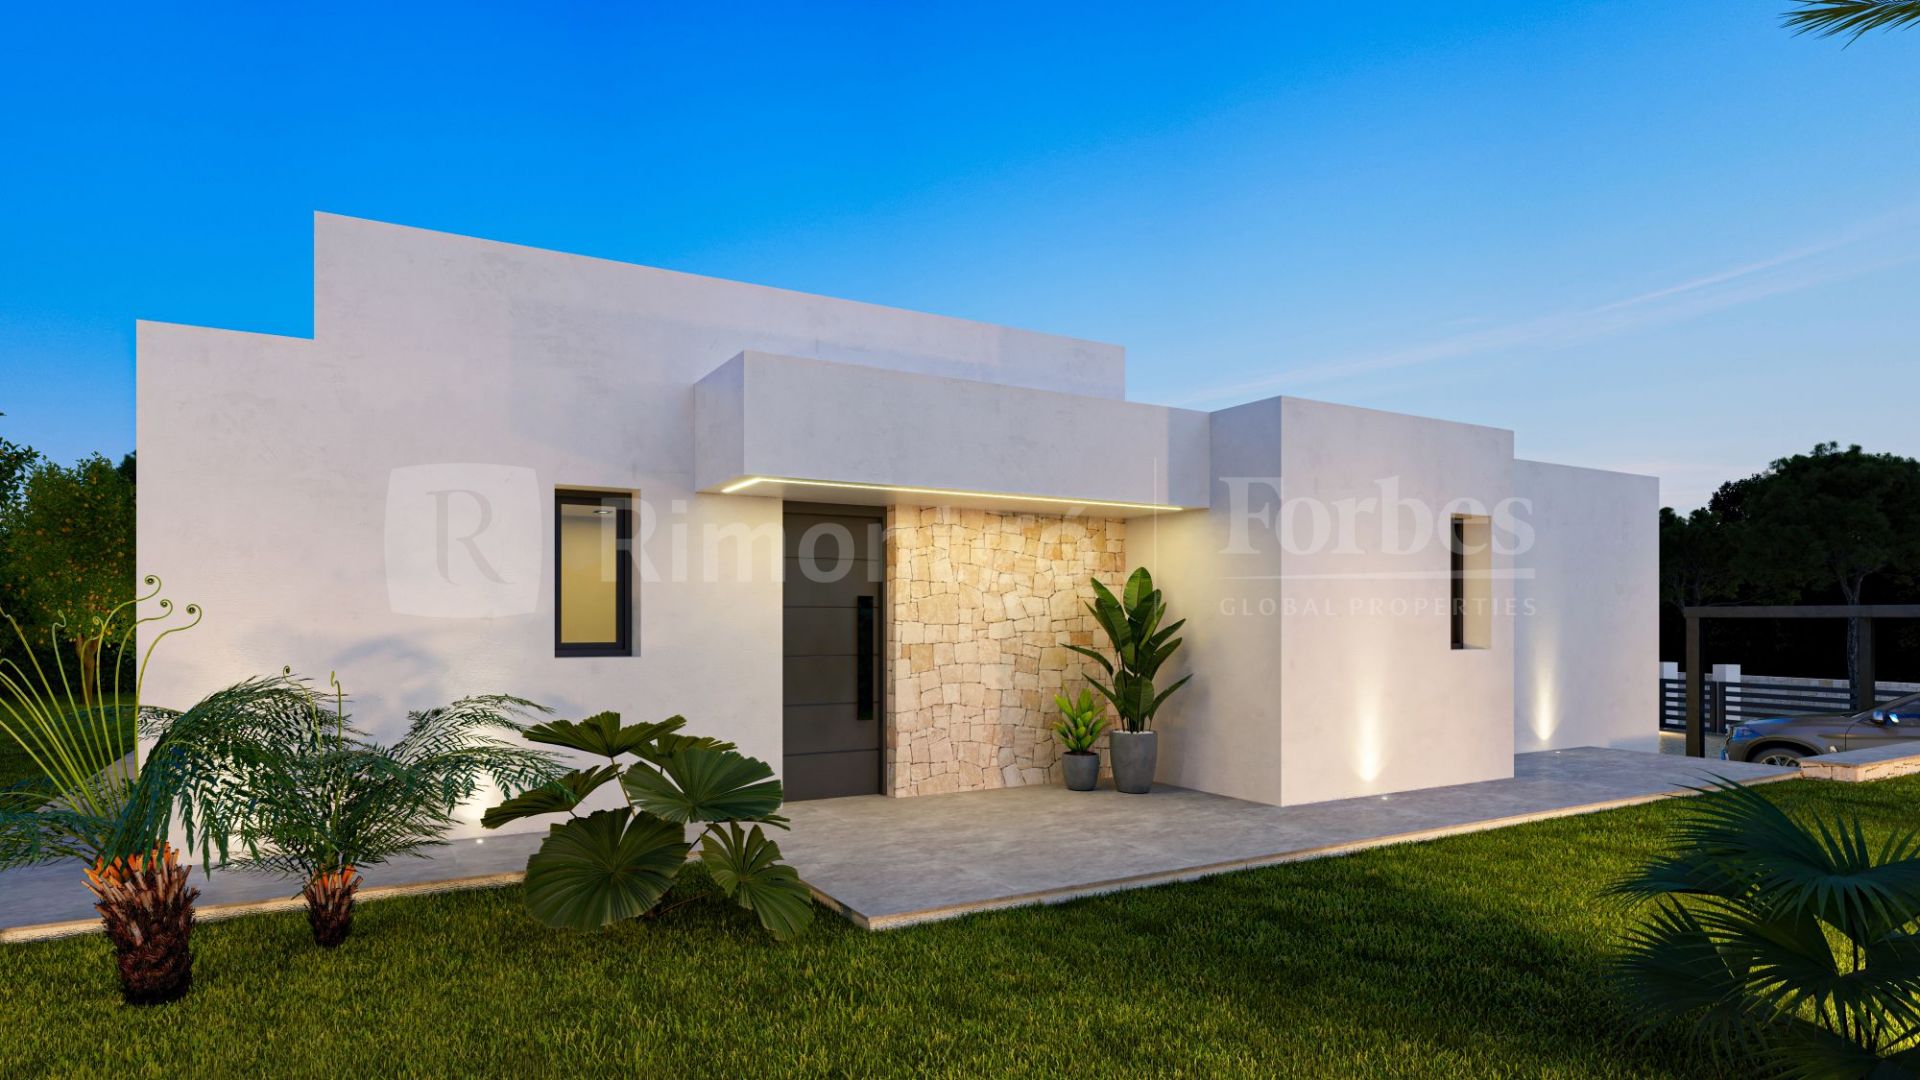 Brand-new villa project located in Dénia